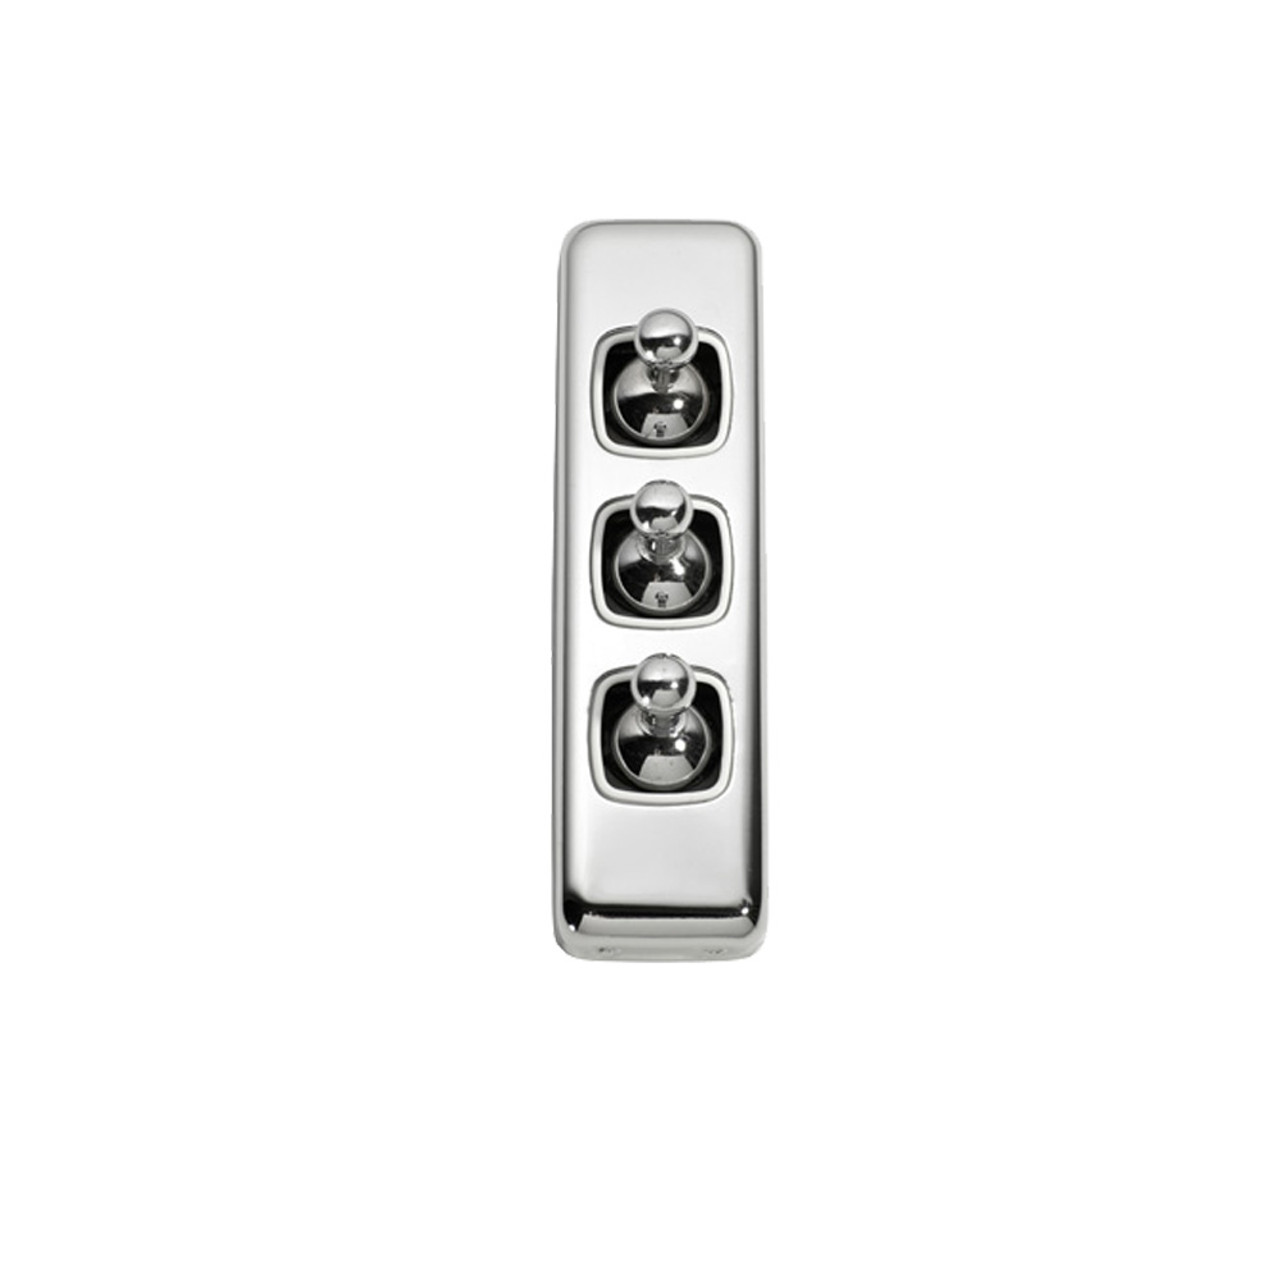 3 Gang Flat Plate Heritage Architrave Light Switches - Chrome Toggle with White Base